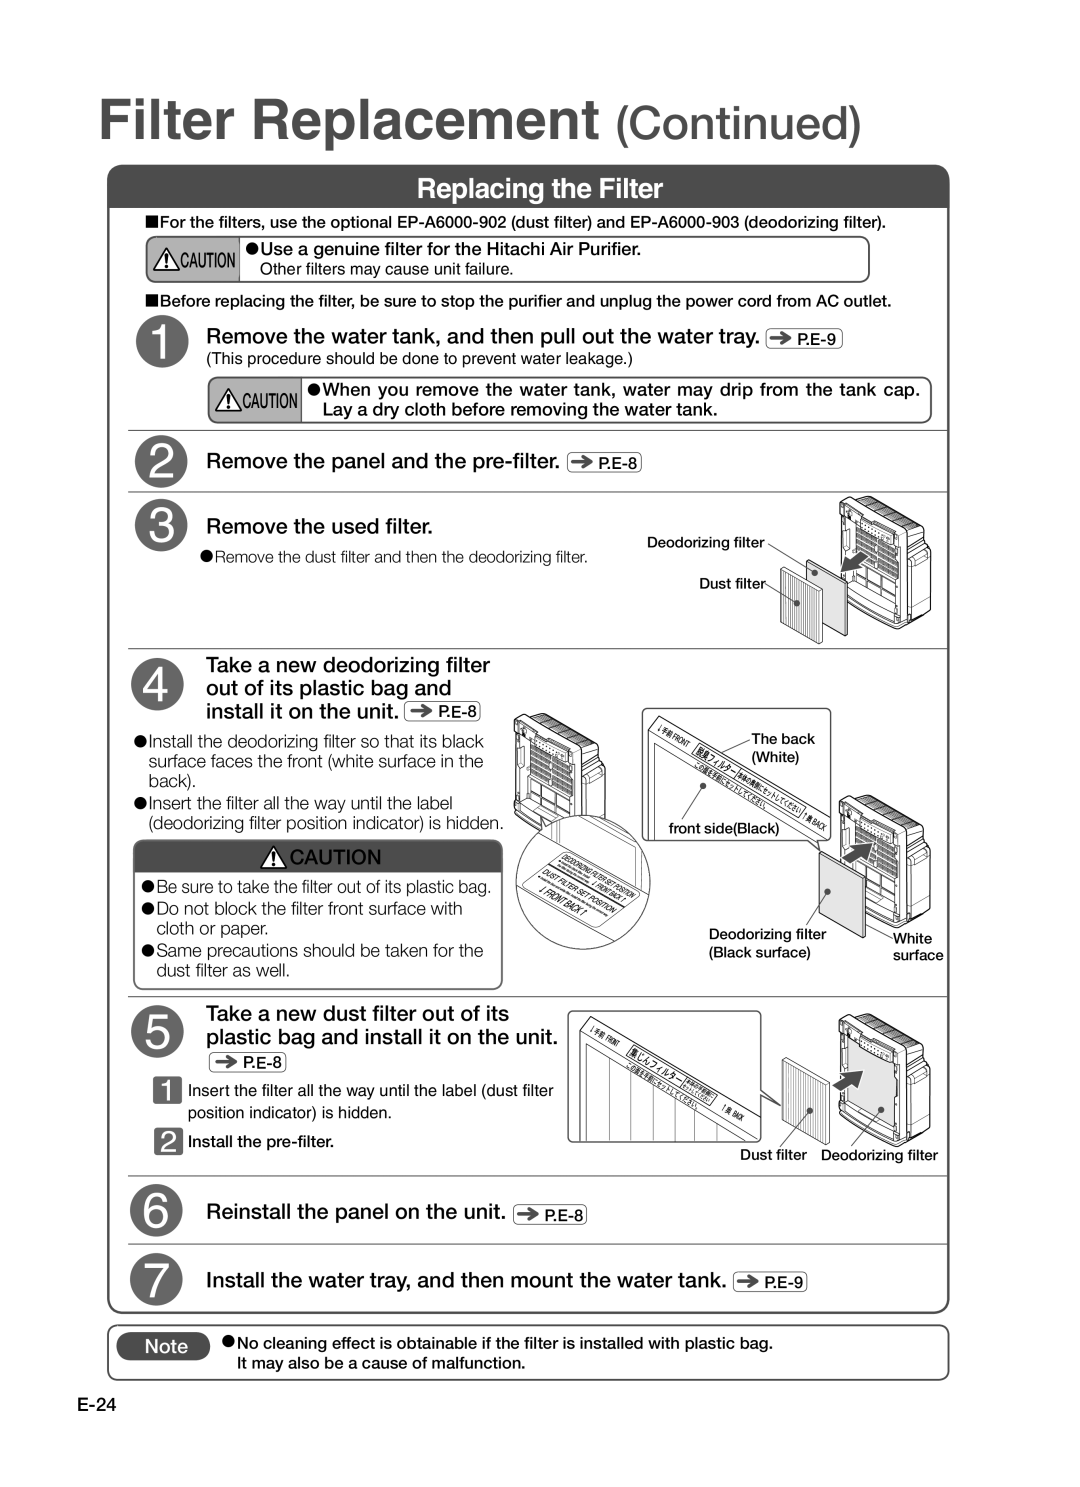 Hitachi EP-A7000 instruction manual Filter Replacement Continued, Replacing the Filter 